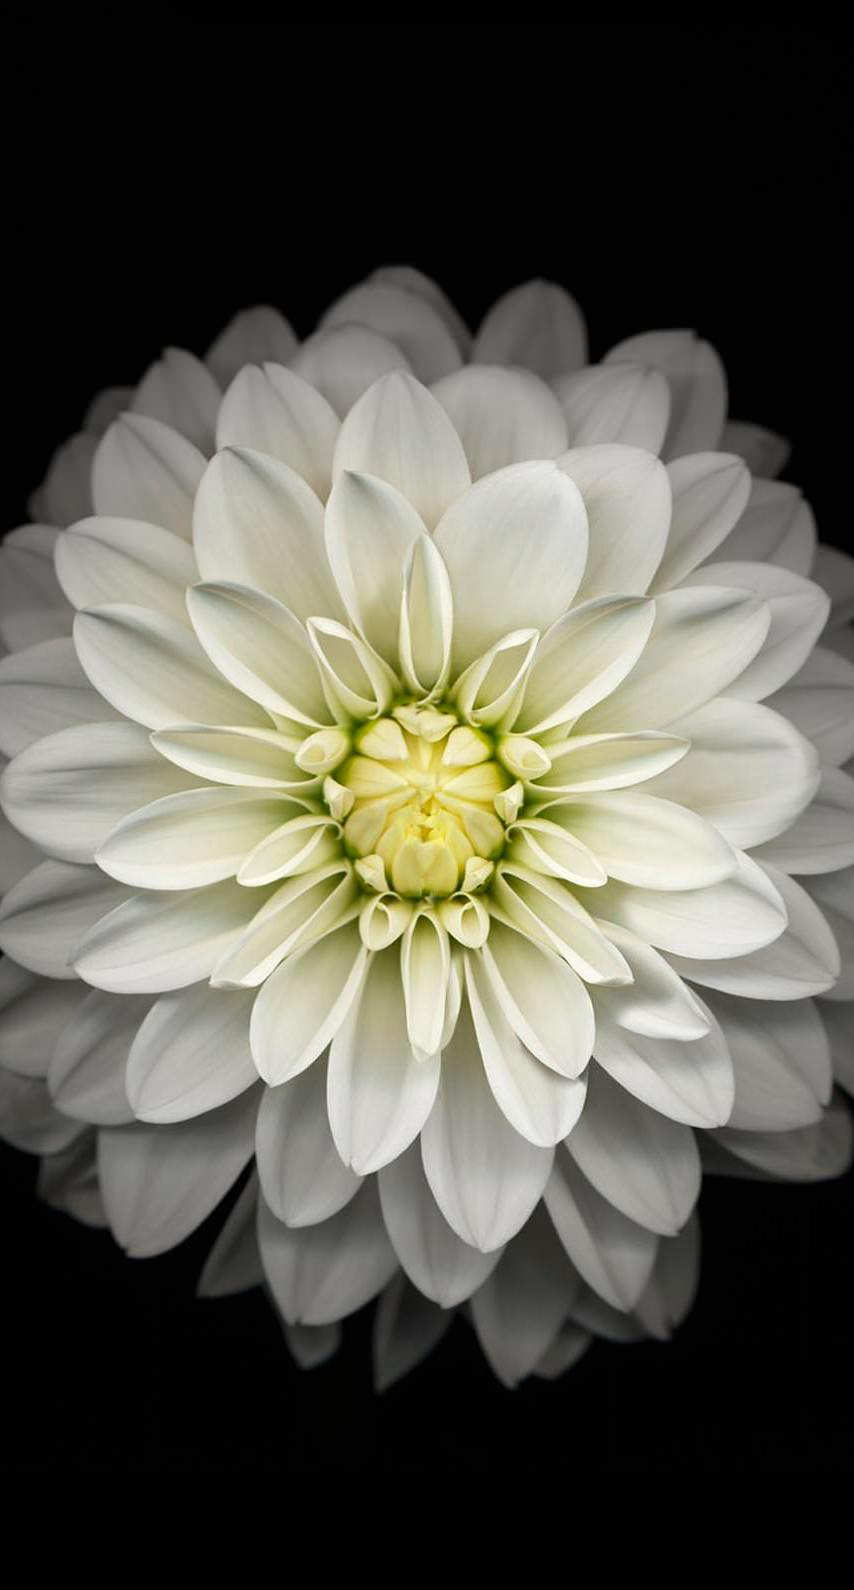 Flower Black And White Wallpaper Sc iPhone6s